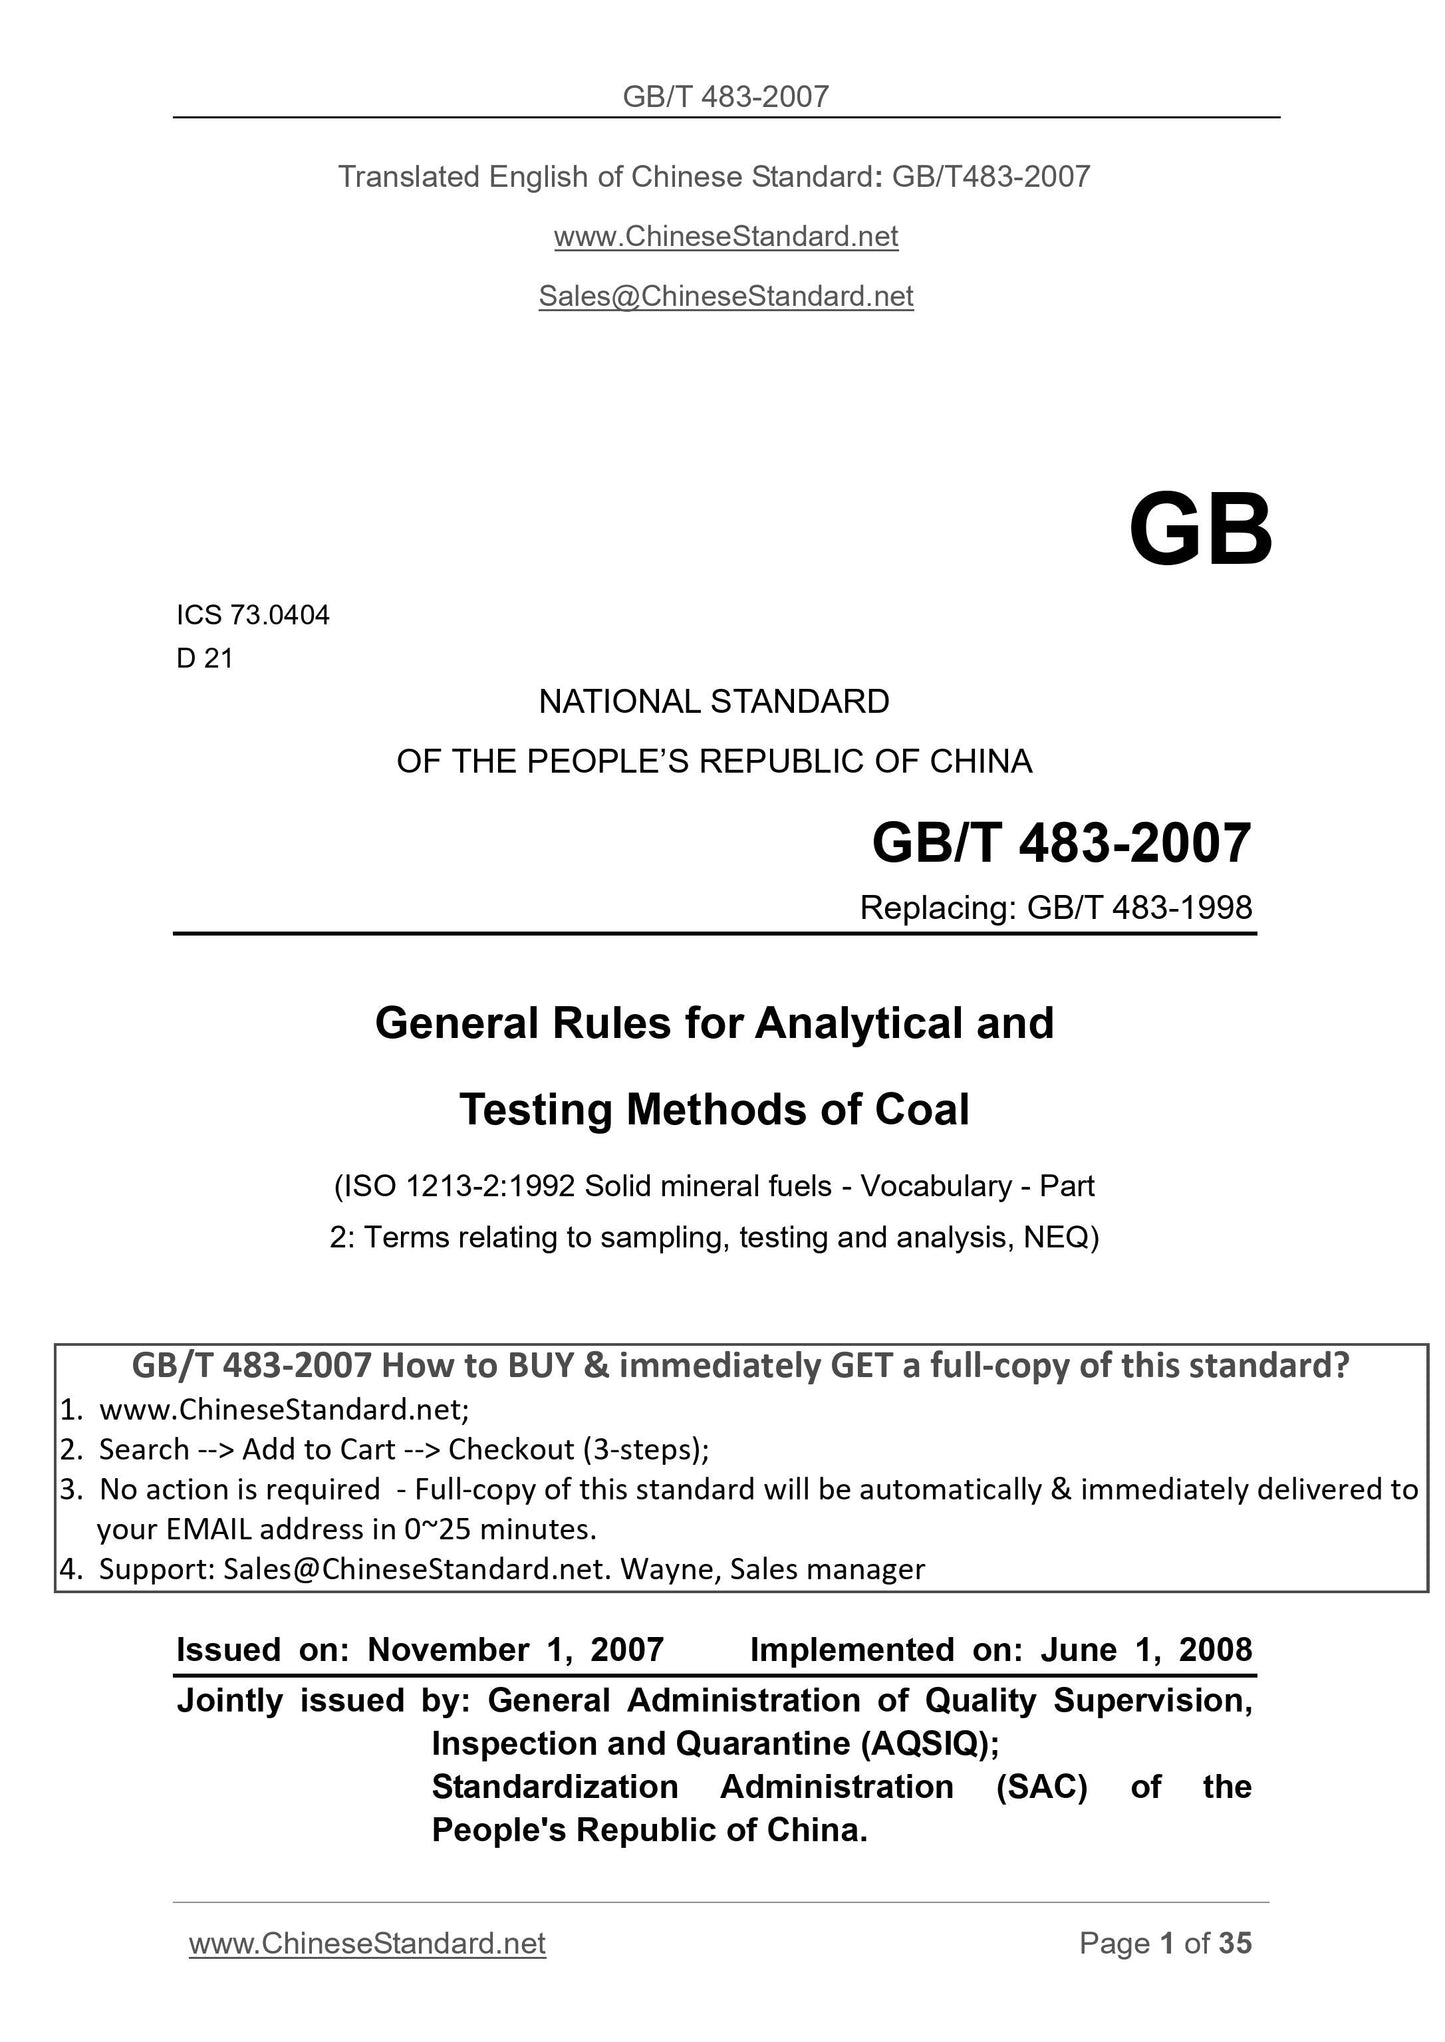 GB/T 483-2007 Page 1